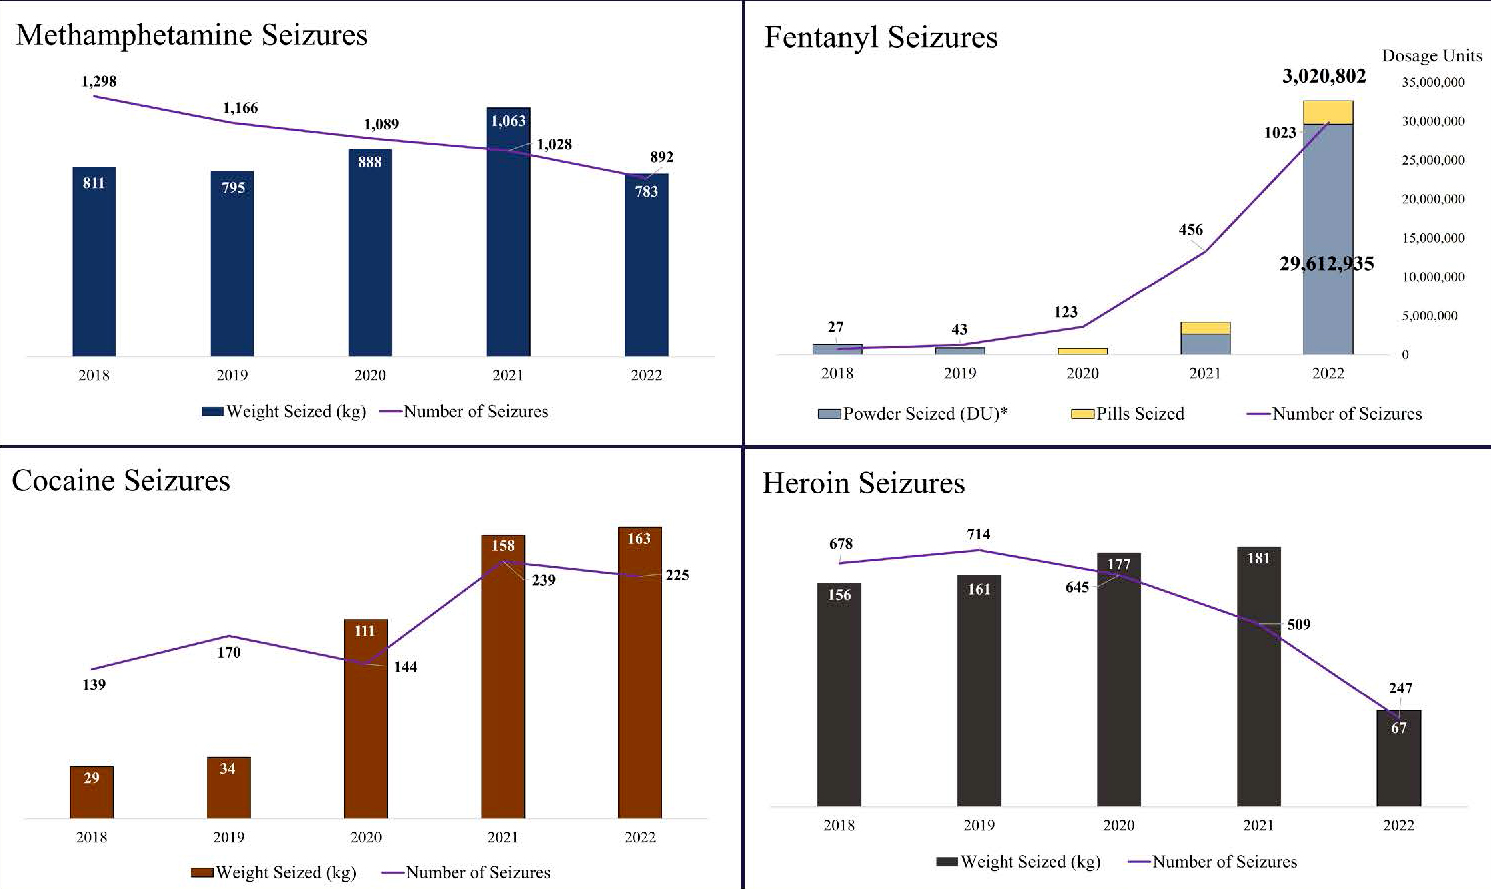 This graphic from the 2022 Annual Report of Oregon-Idaho High Intensity Drug Trafficking Area (HIDTA), shows seizures of fentanyl, in both pill and powdered forms, rapidly outpaced other drug seizures in 2022. The report states “more than 423,690 kilograms, and 3,383,975 dosage units of all illicit drugs seized during 2022: Three million of which were counterfeit prescription pills containing fentanyl.”